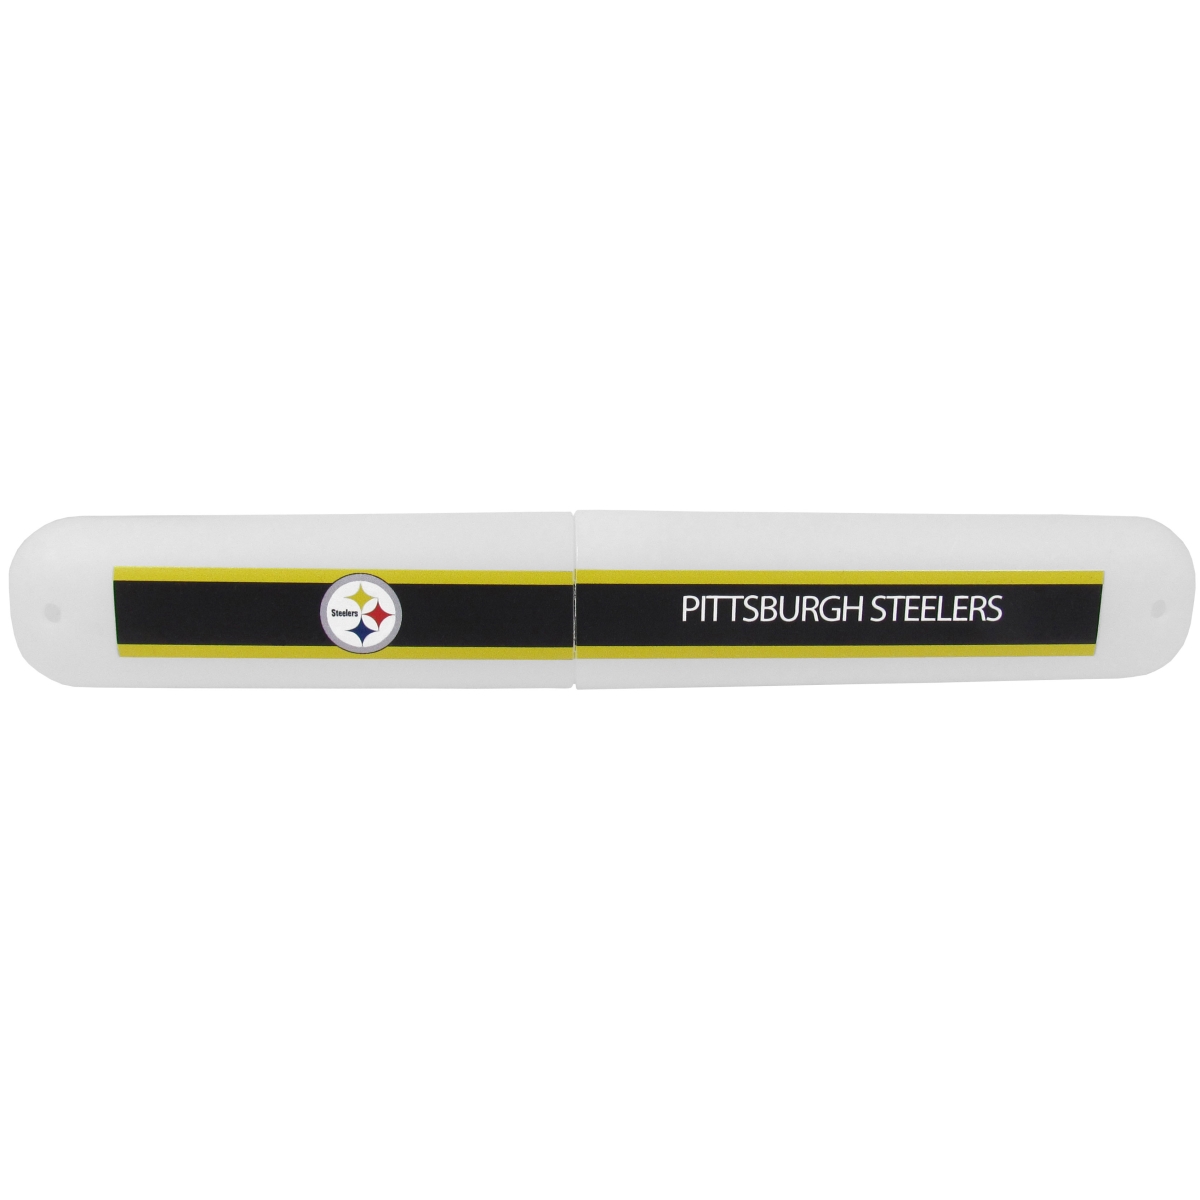 Picture of Siskiyou FTBC160 Unisex NFL Pittsburgh Steelers Travel Toothbrush Case - One Size